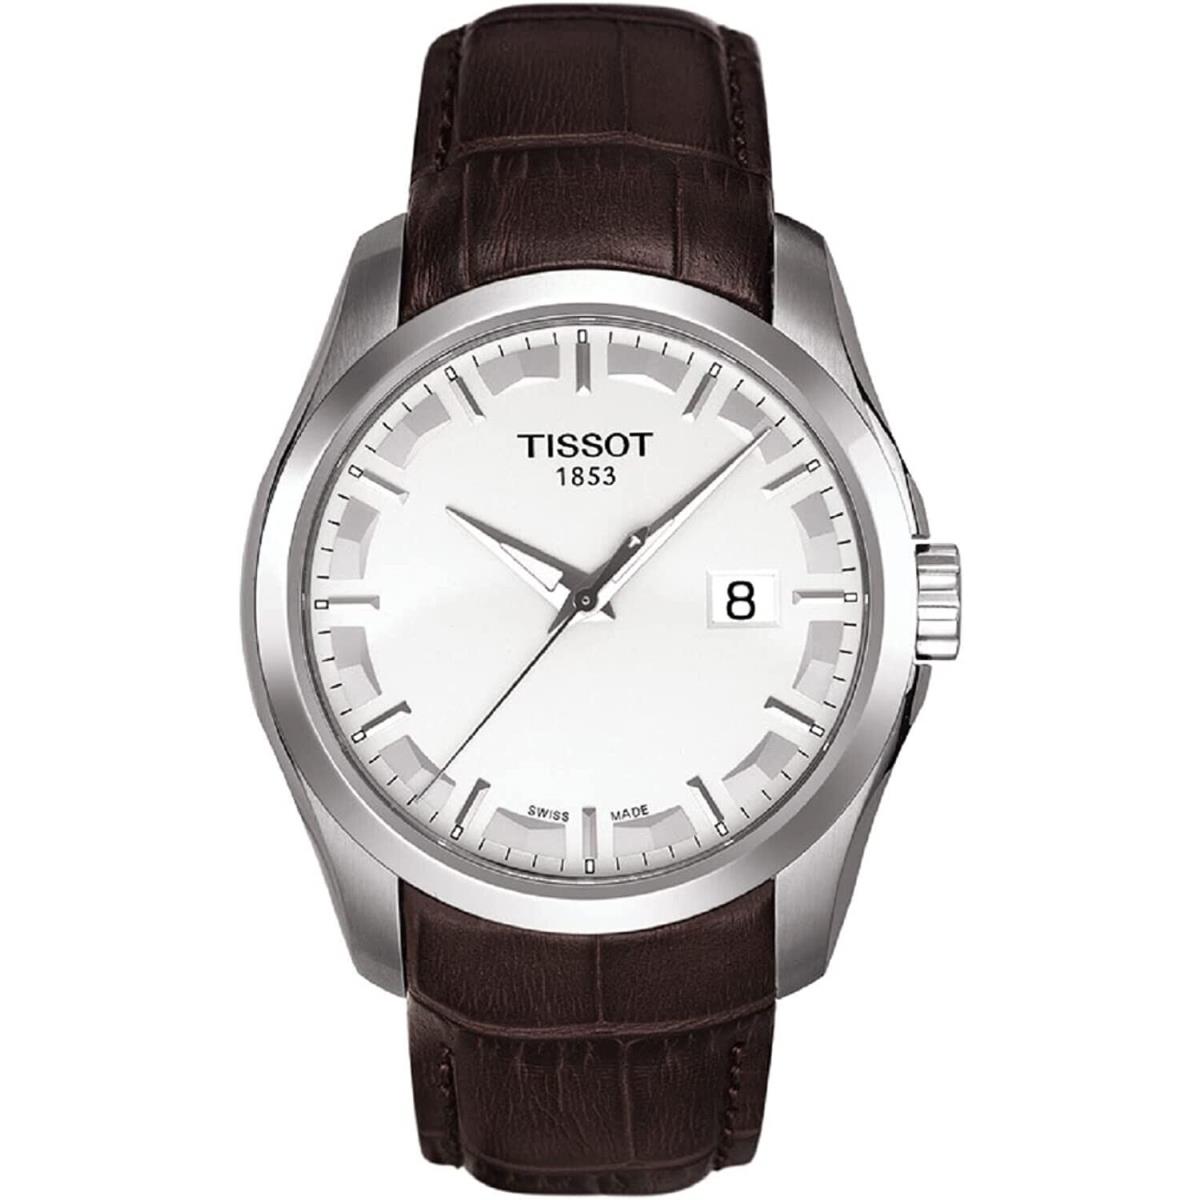 Tissot Men`s Watches Couturier T035.410.16.031.00 - Dial: White, Band: Brown, Bezel: Silver